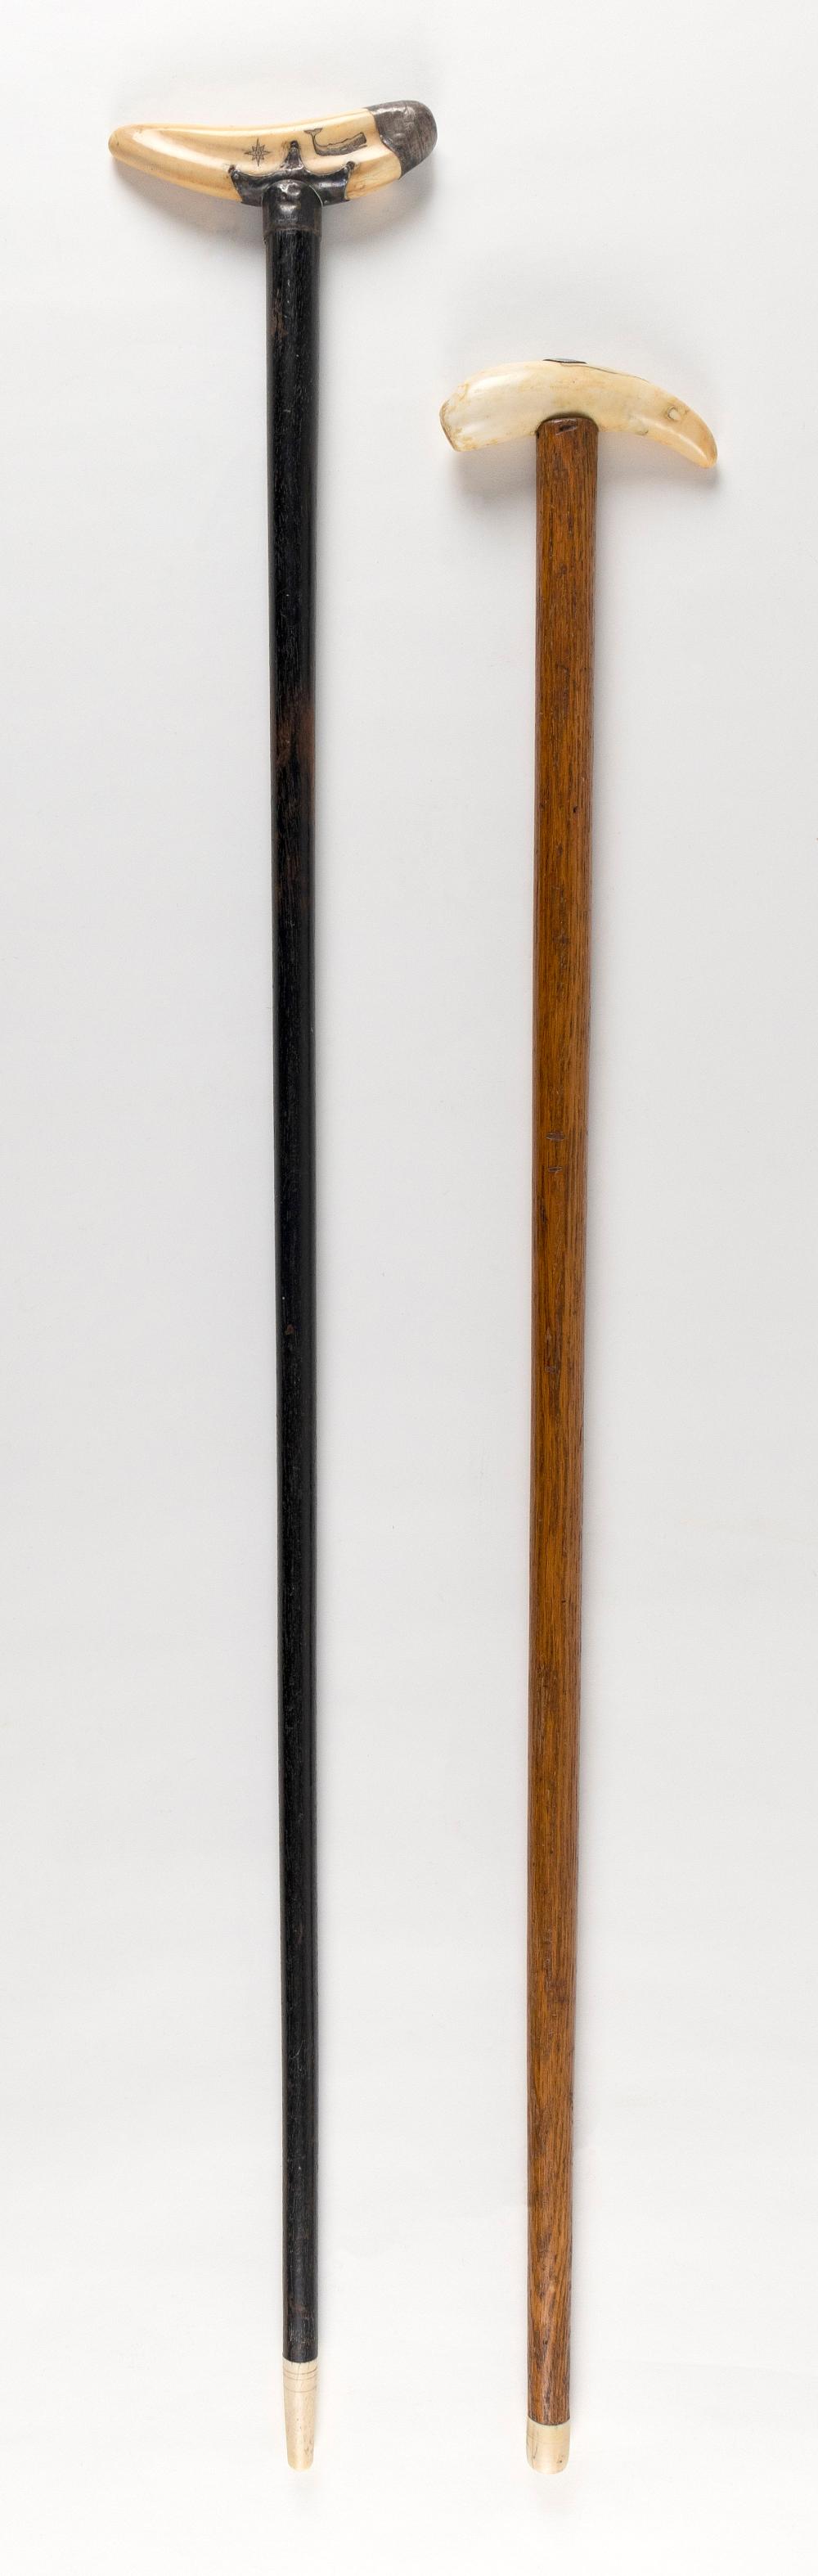  TWO CANES 20TH CENTURY LENGTHS 34f9b9